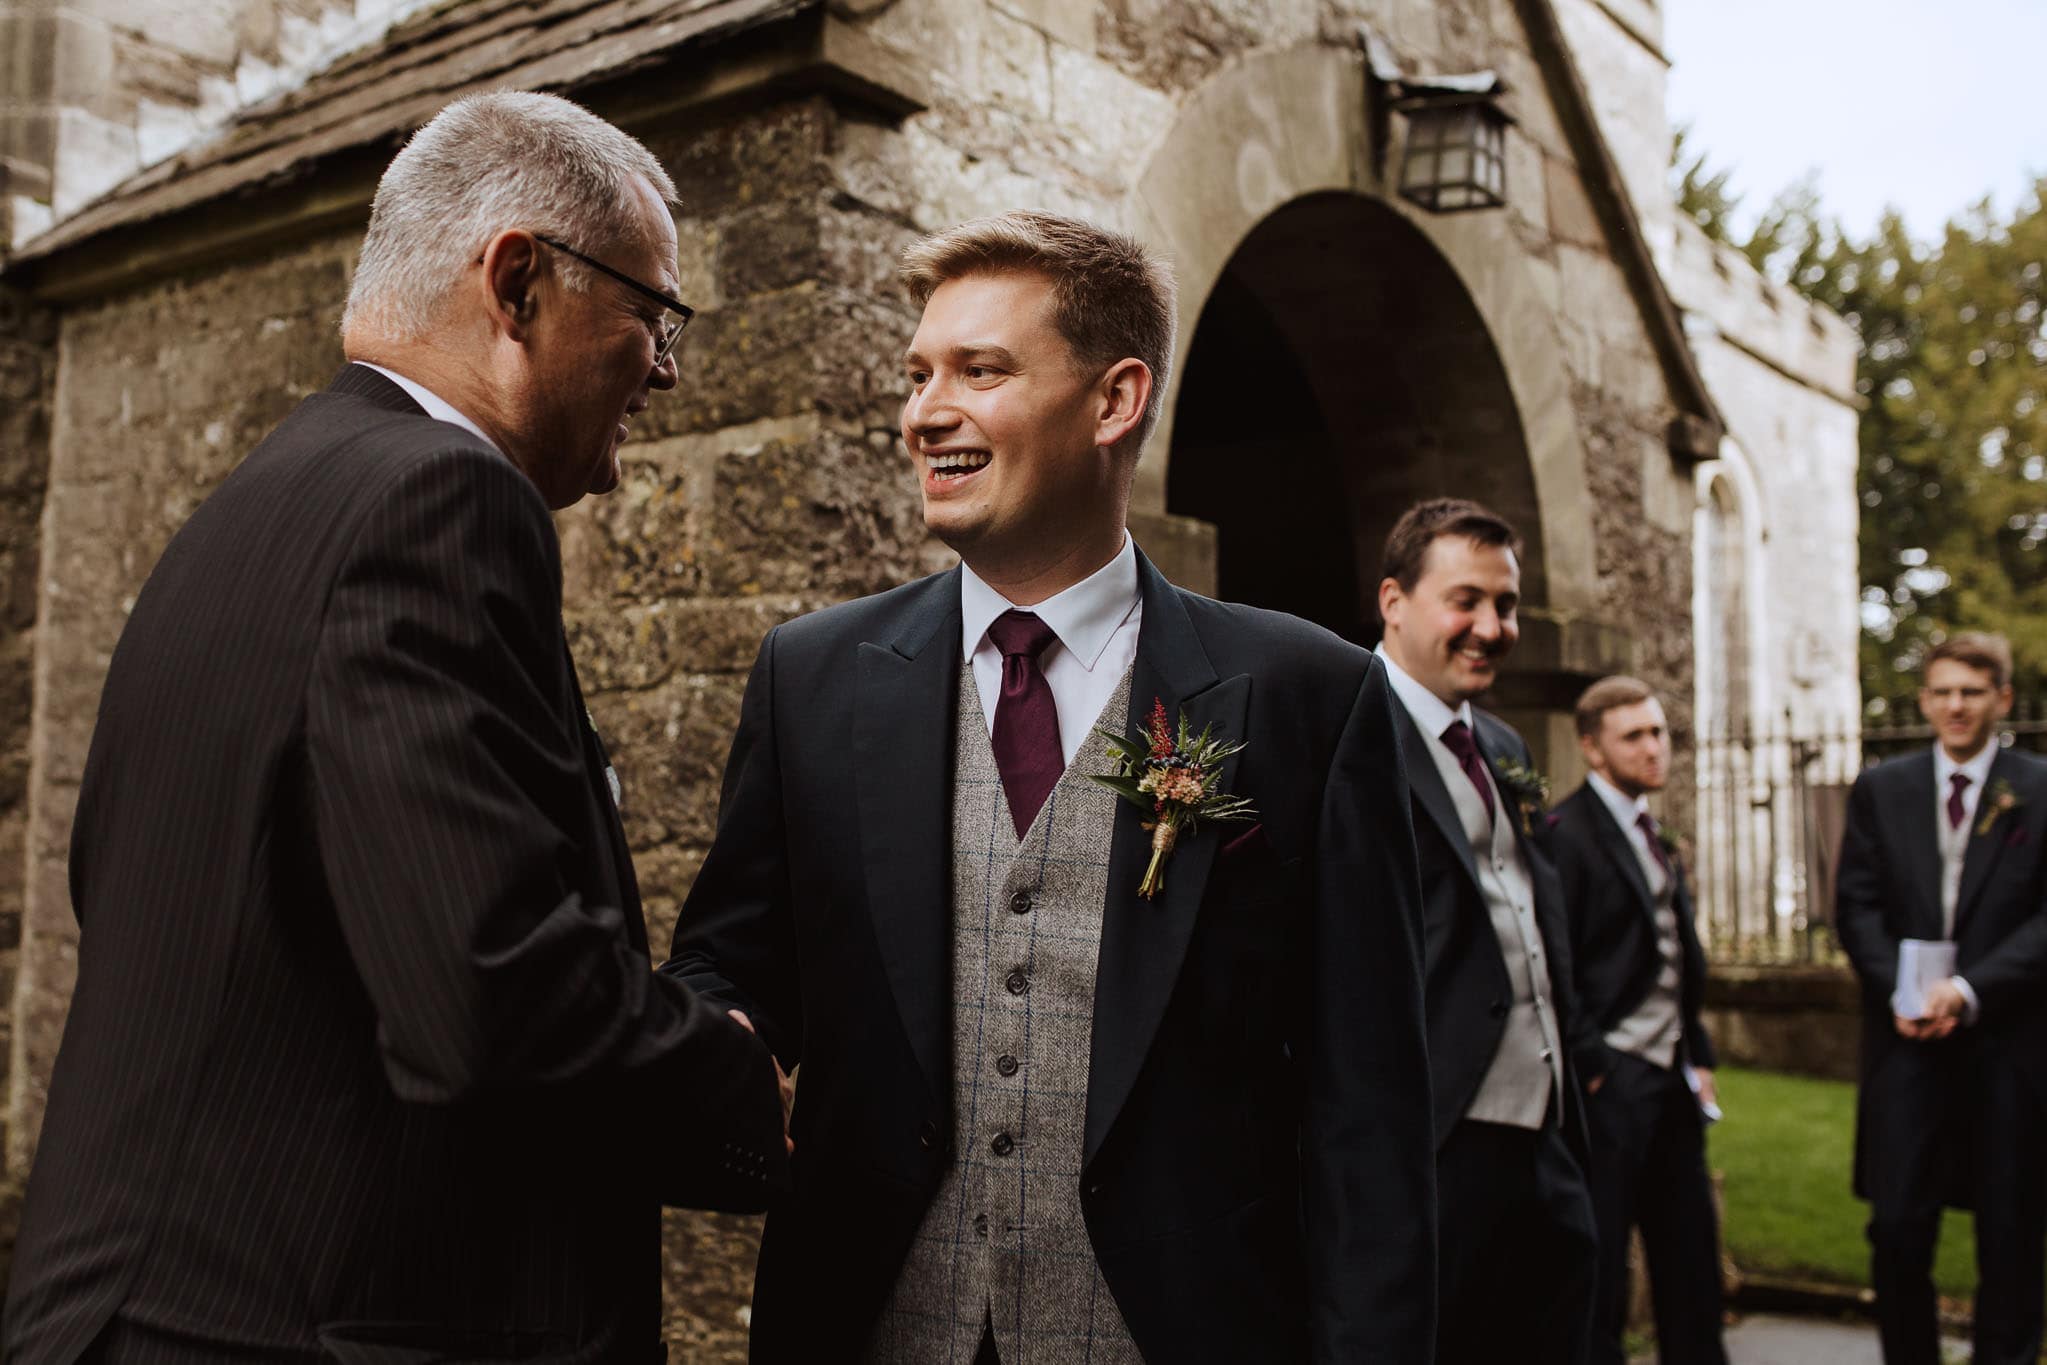 shot of the groom greeting his guests at the church